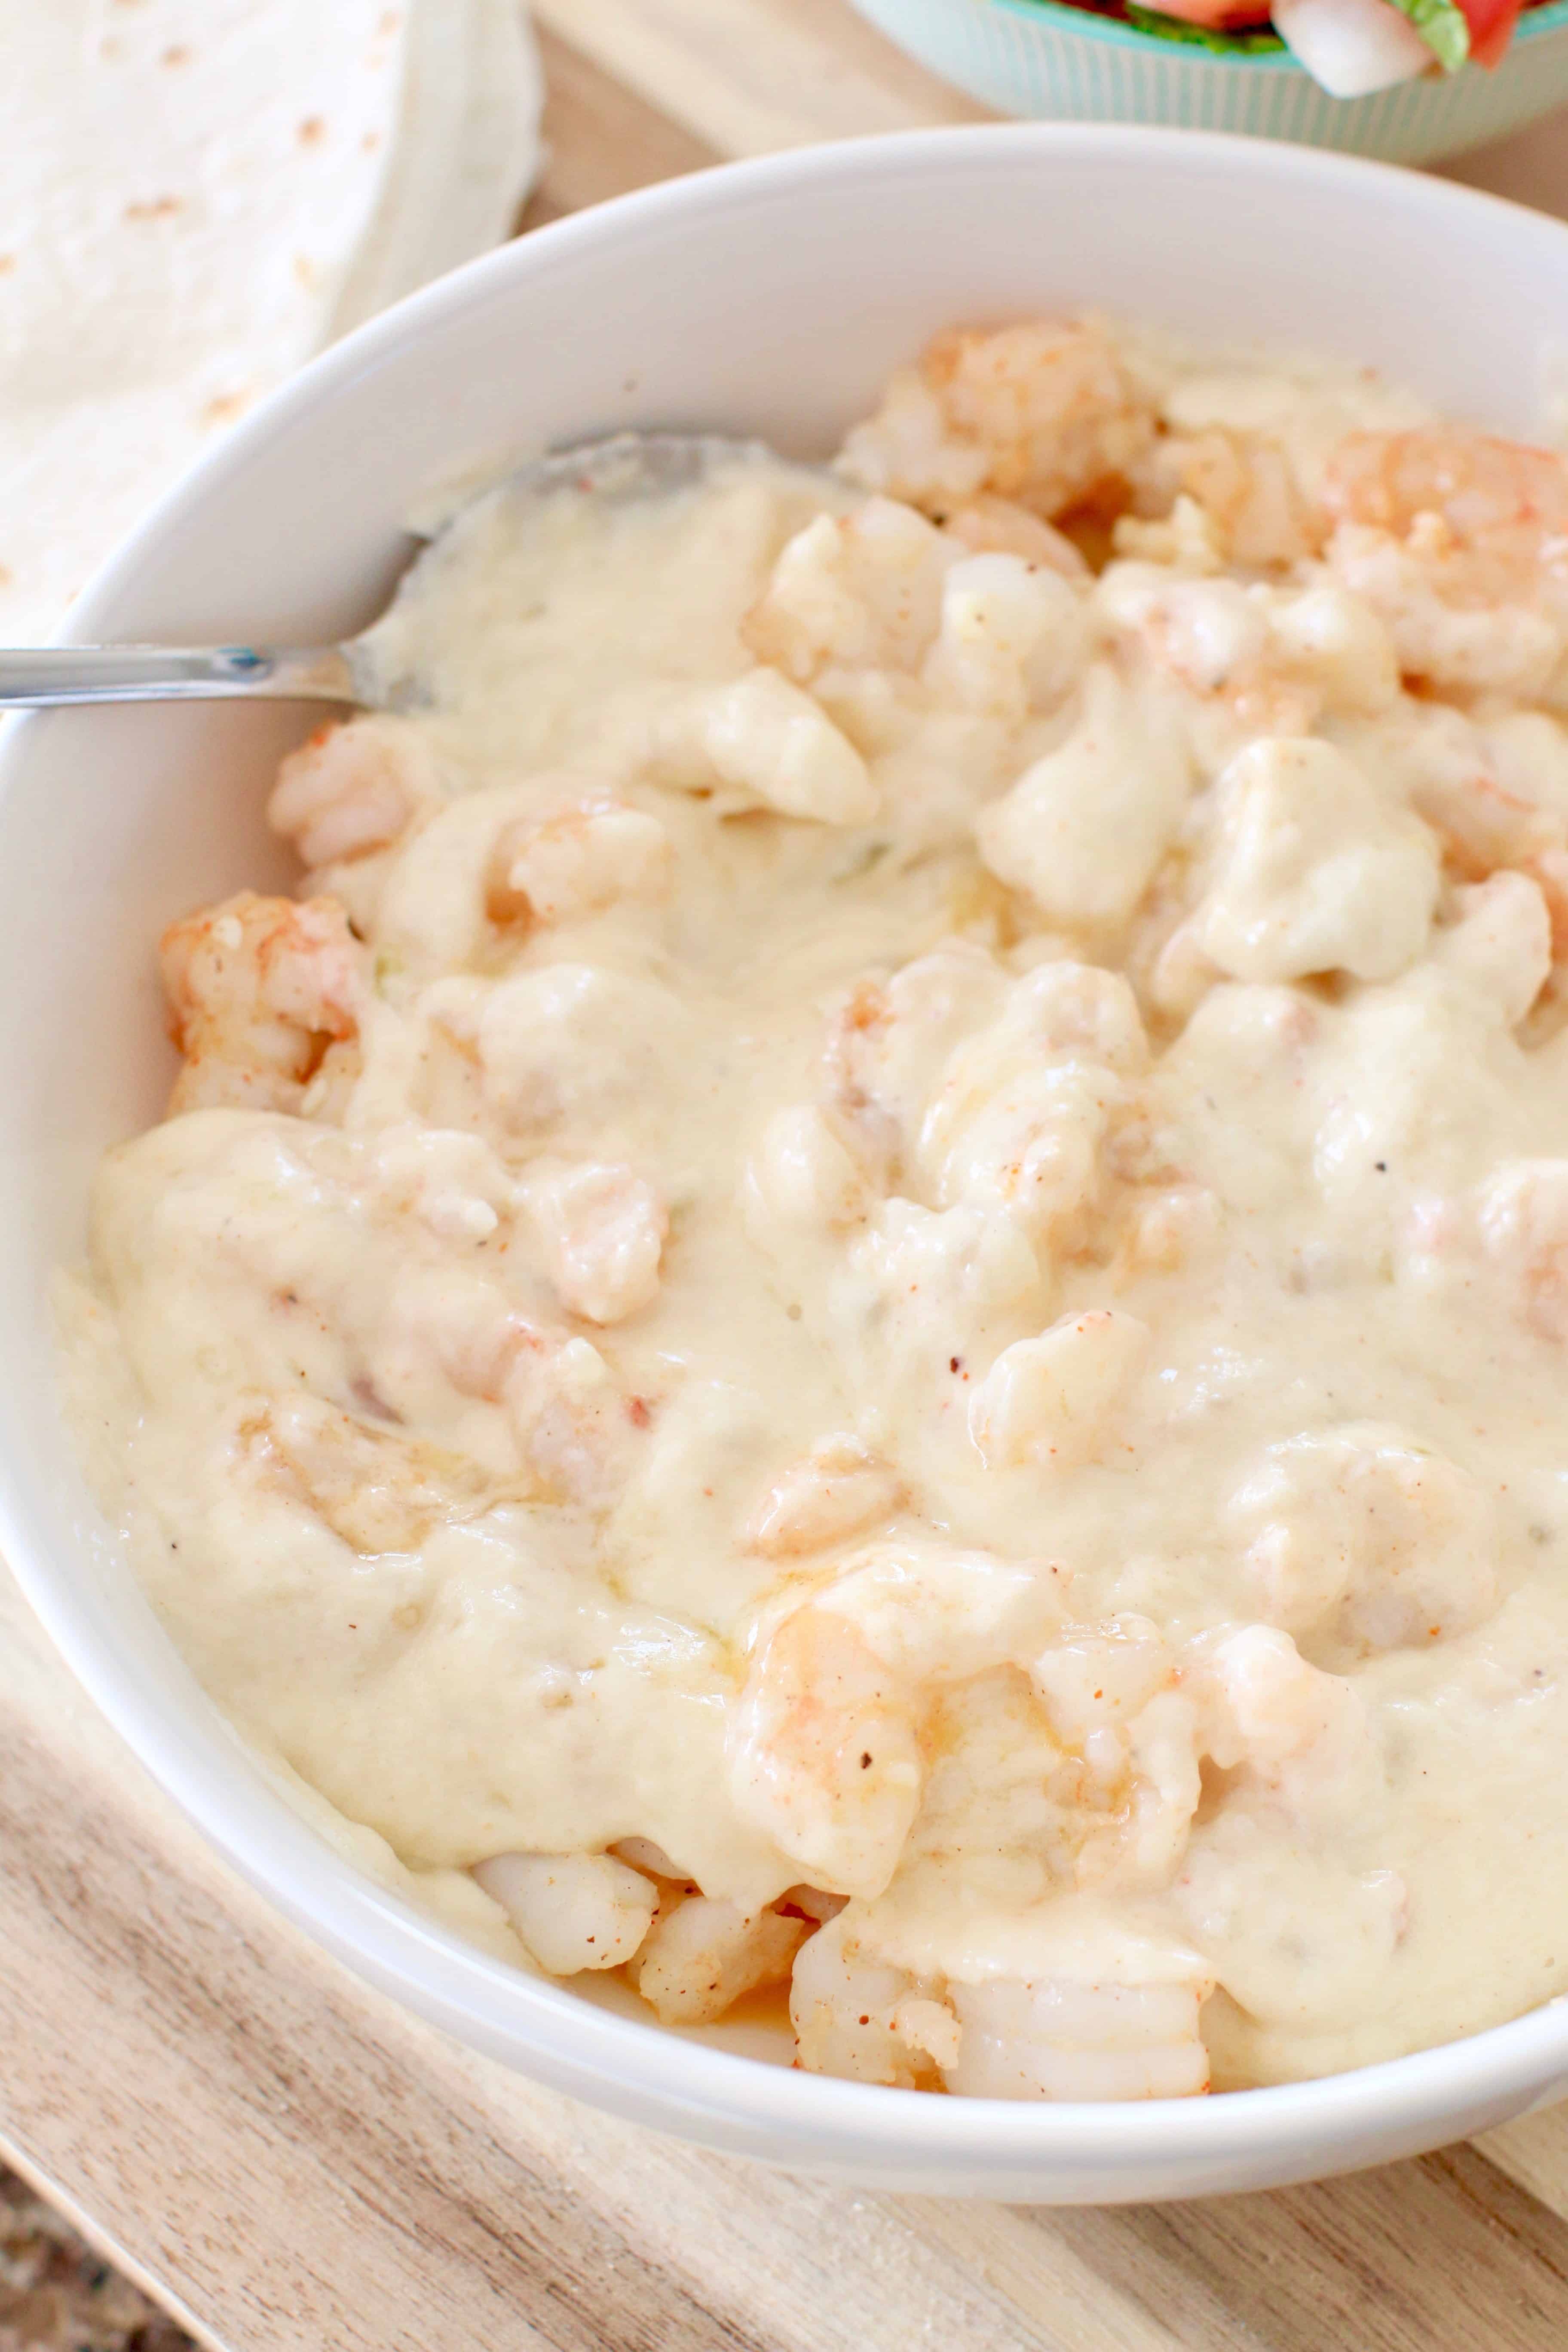 cheese sauce added to cooked shrimp in a white bowl.